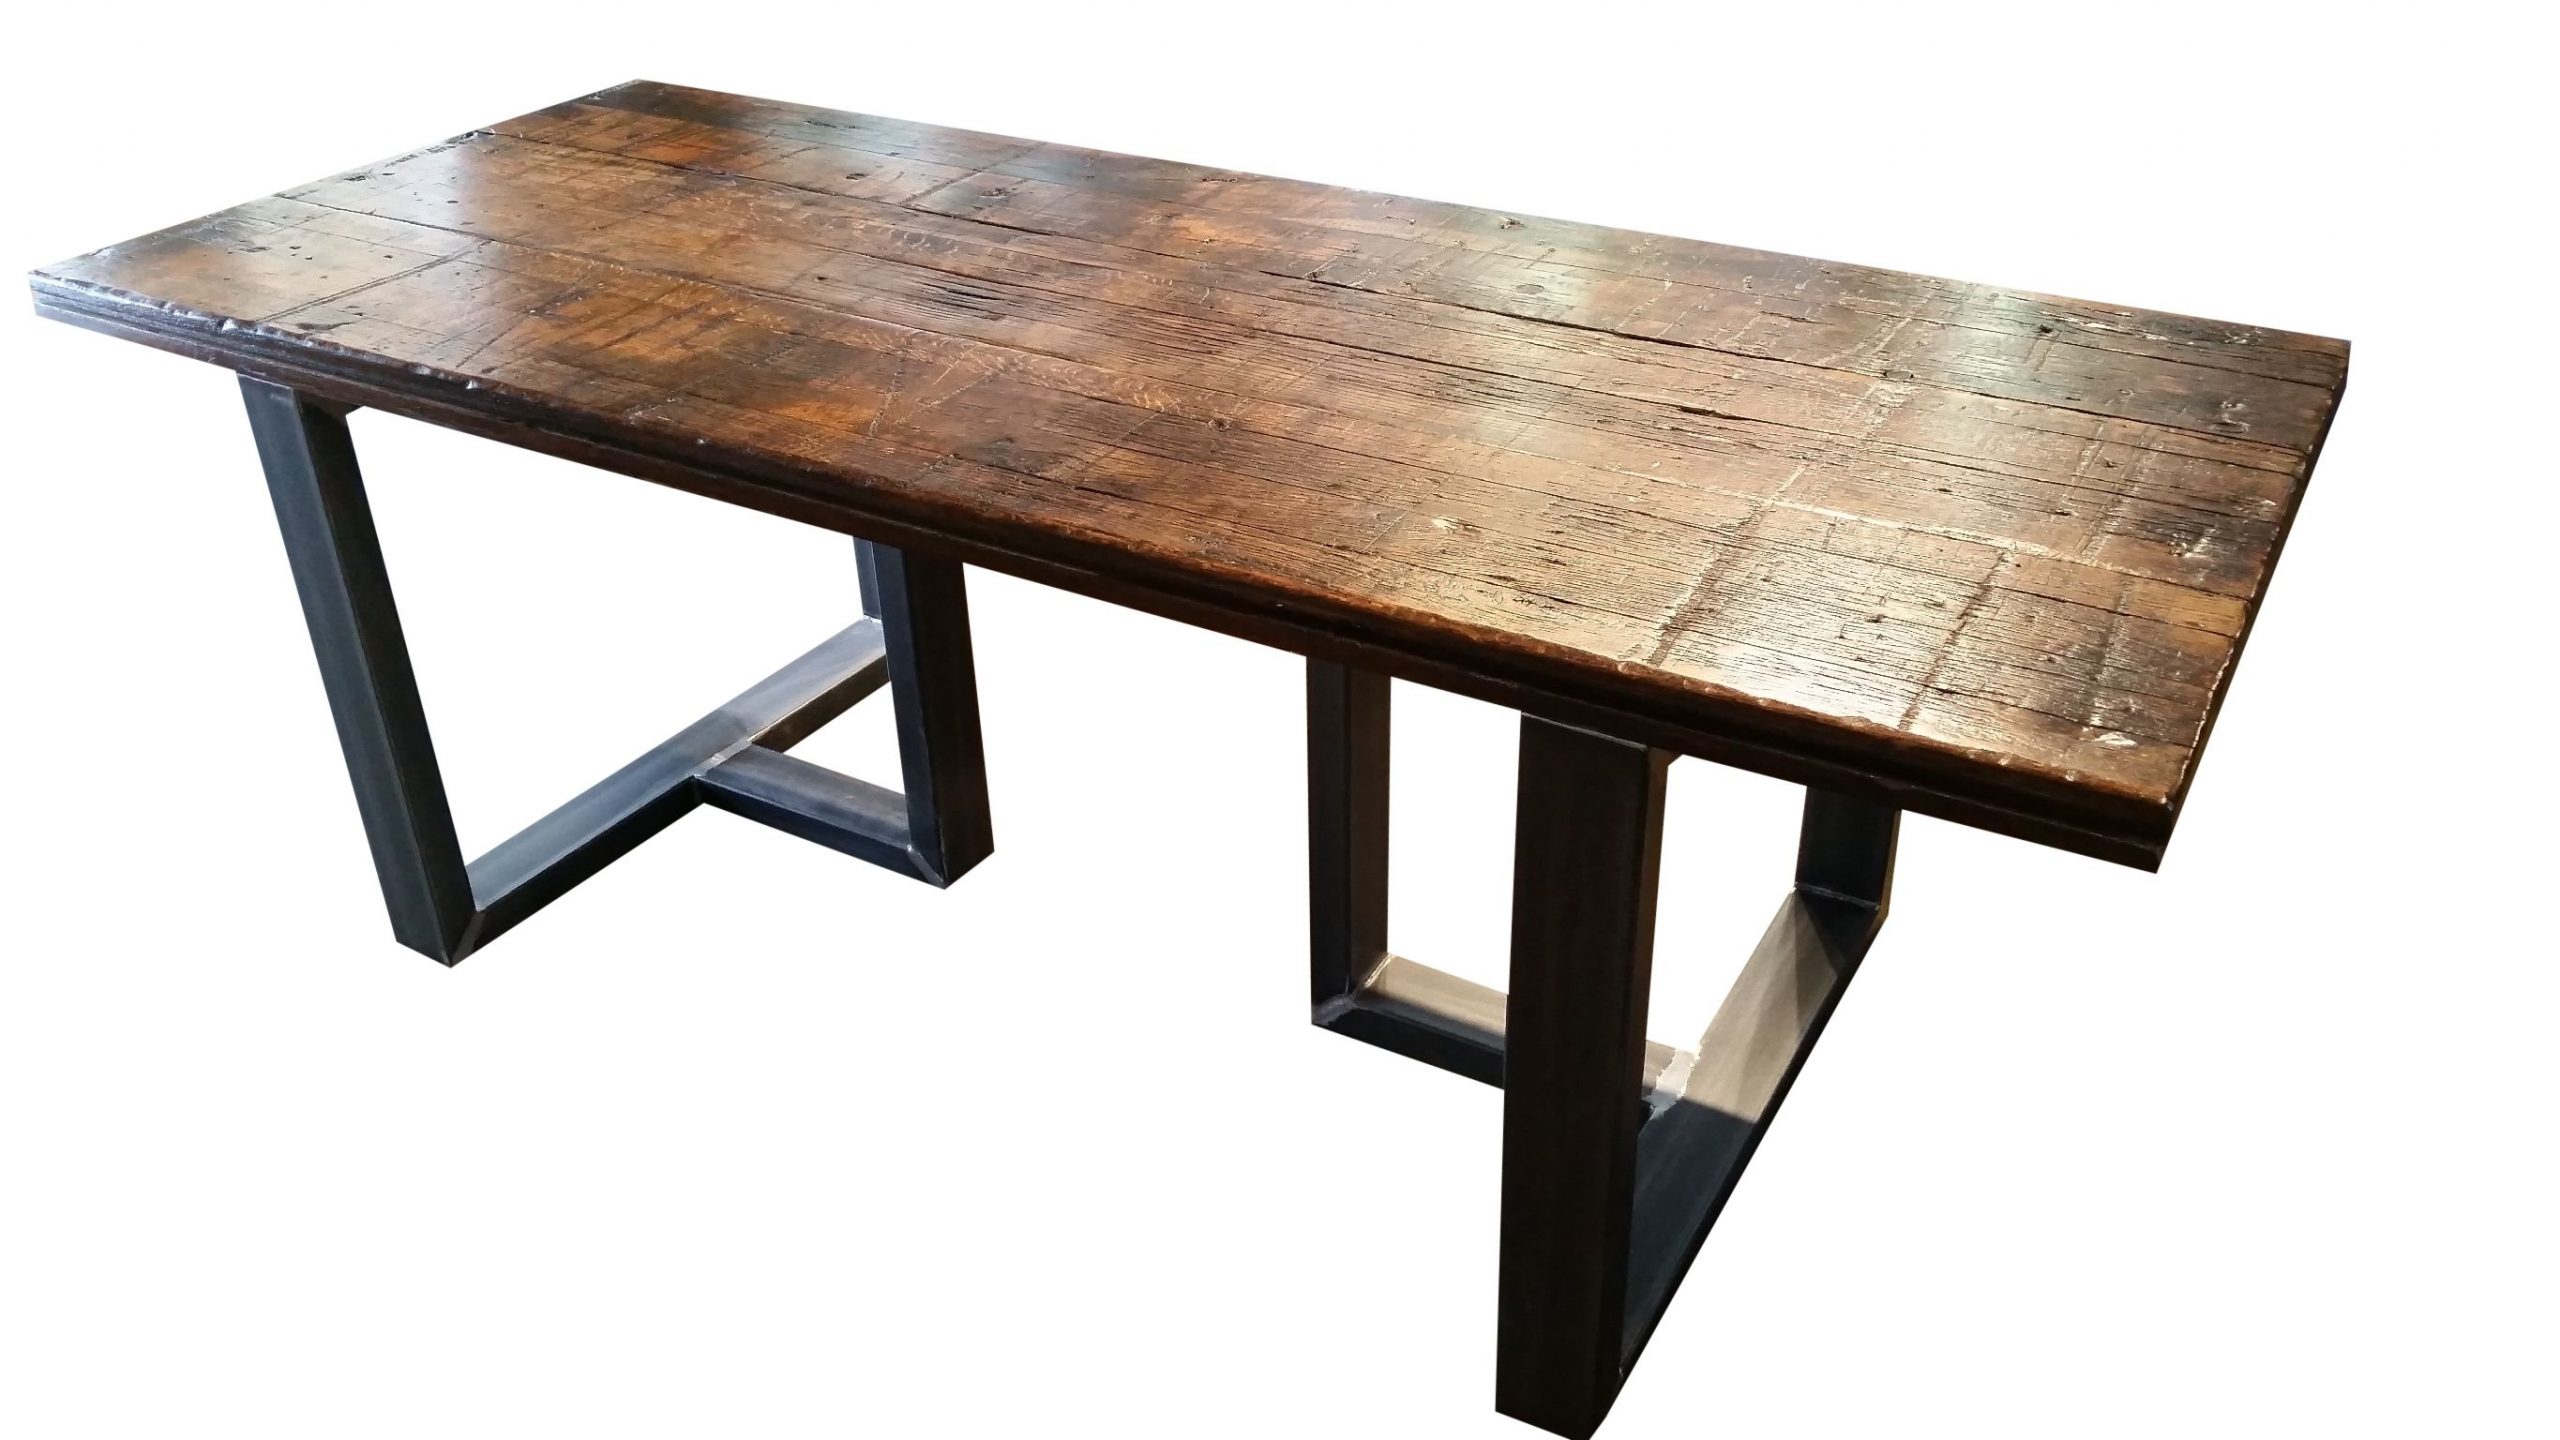 Hand Made Reclaimed Wood Dining Table Urban Ironcraft within dimensions 2730 X 1536